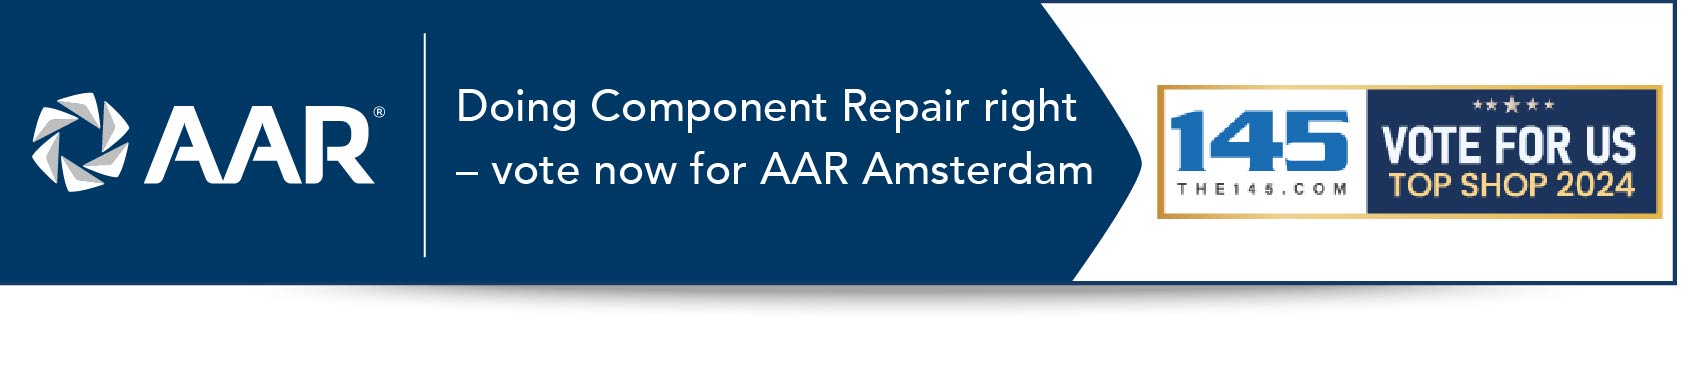 Vote for Component Repair - Amsterdam as Your Top Shop